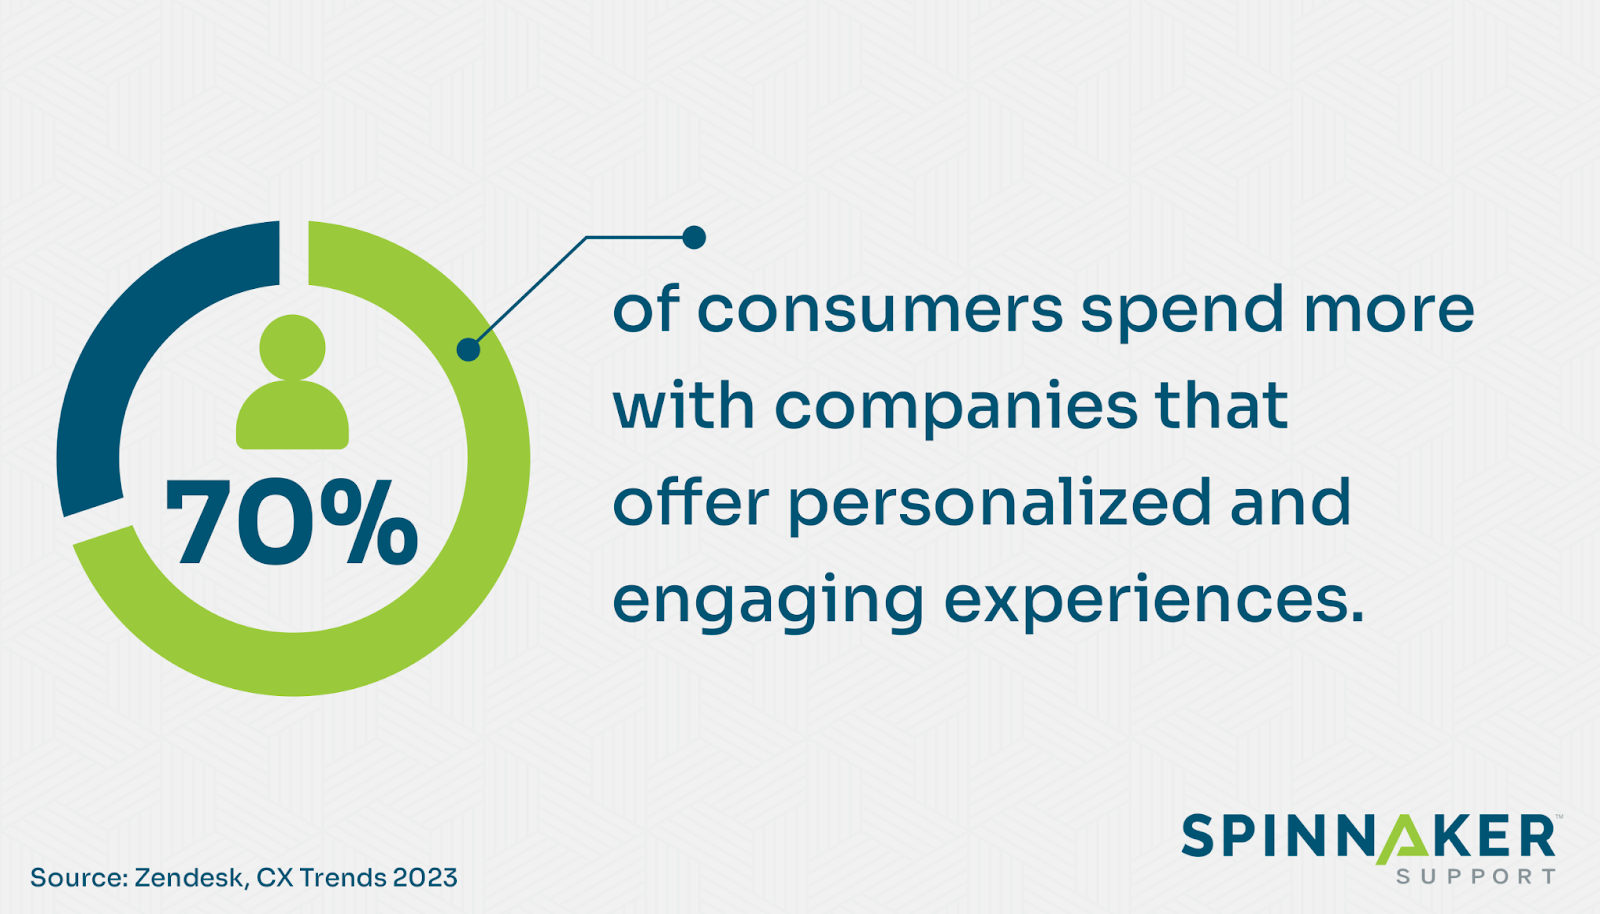 70% of consumers spend more with companies that offer personalized experiences